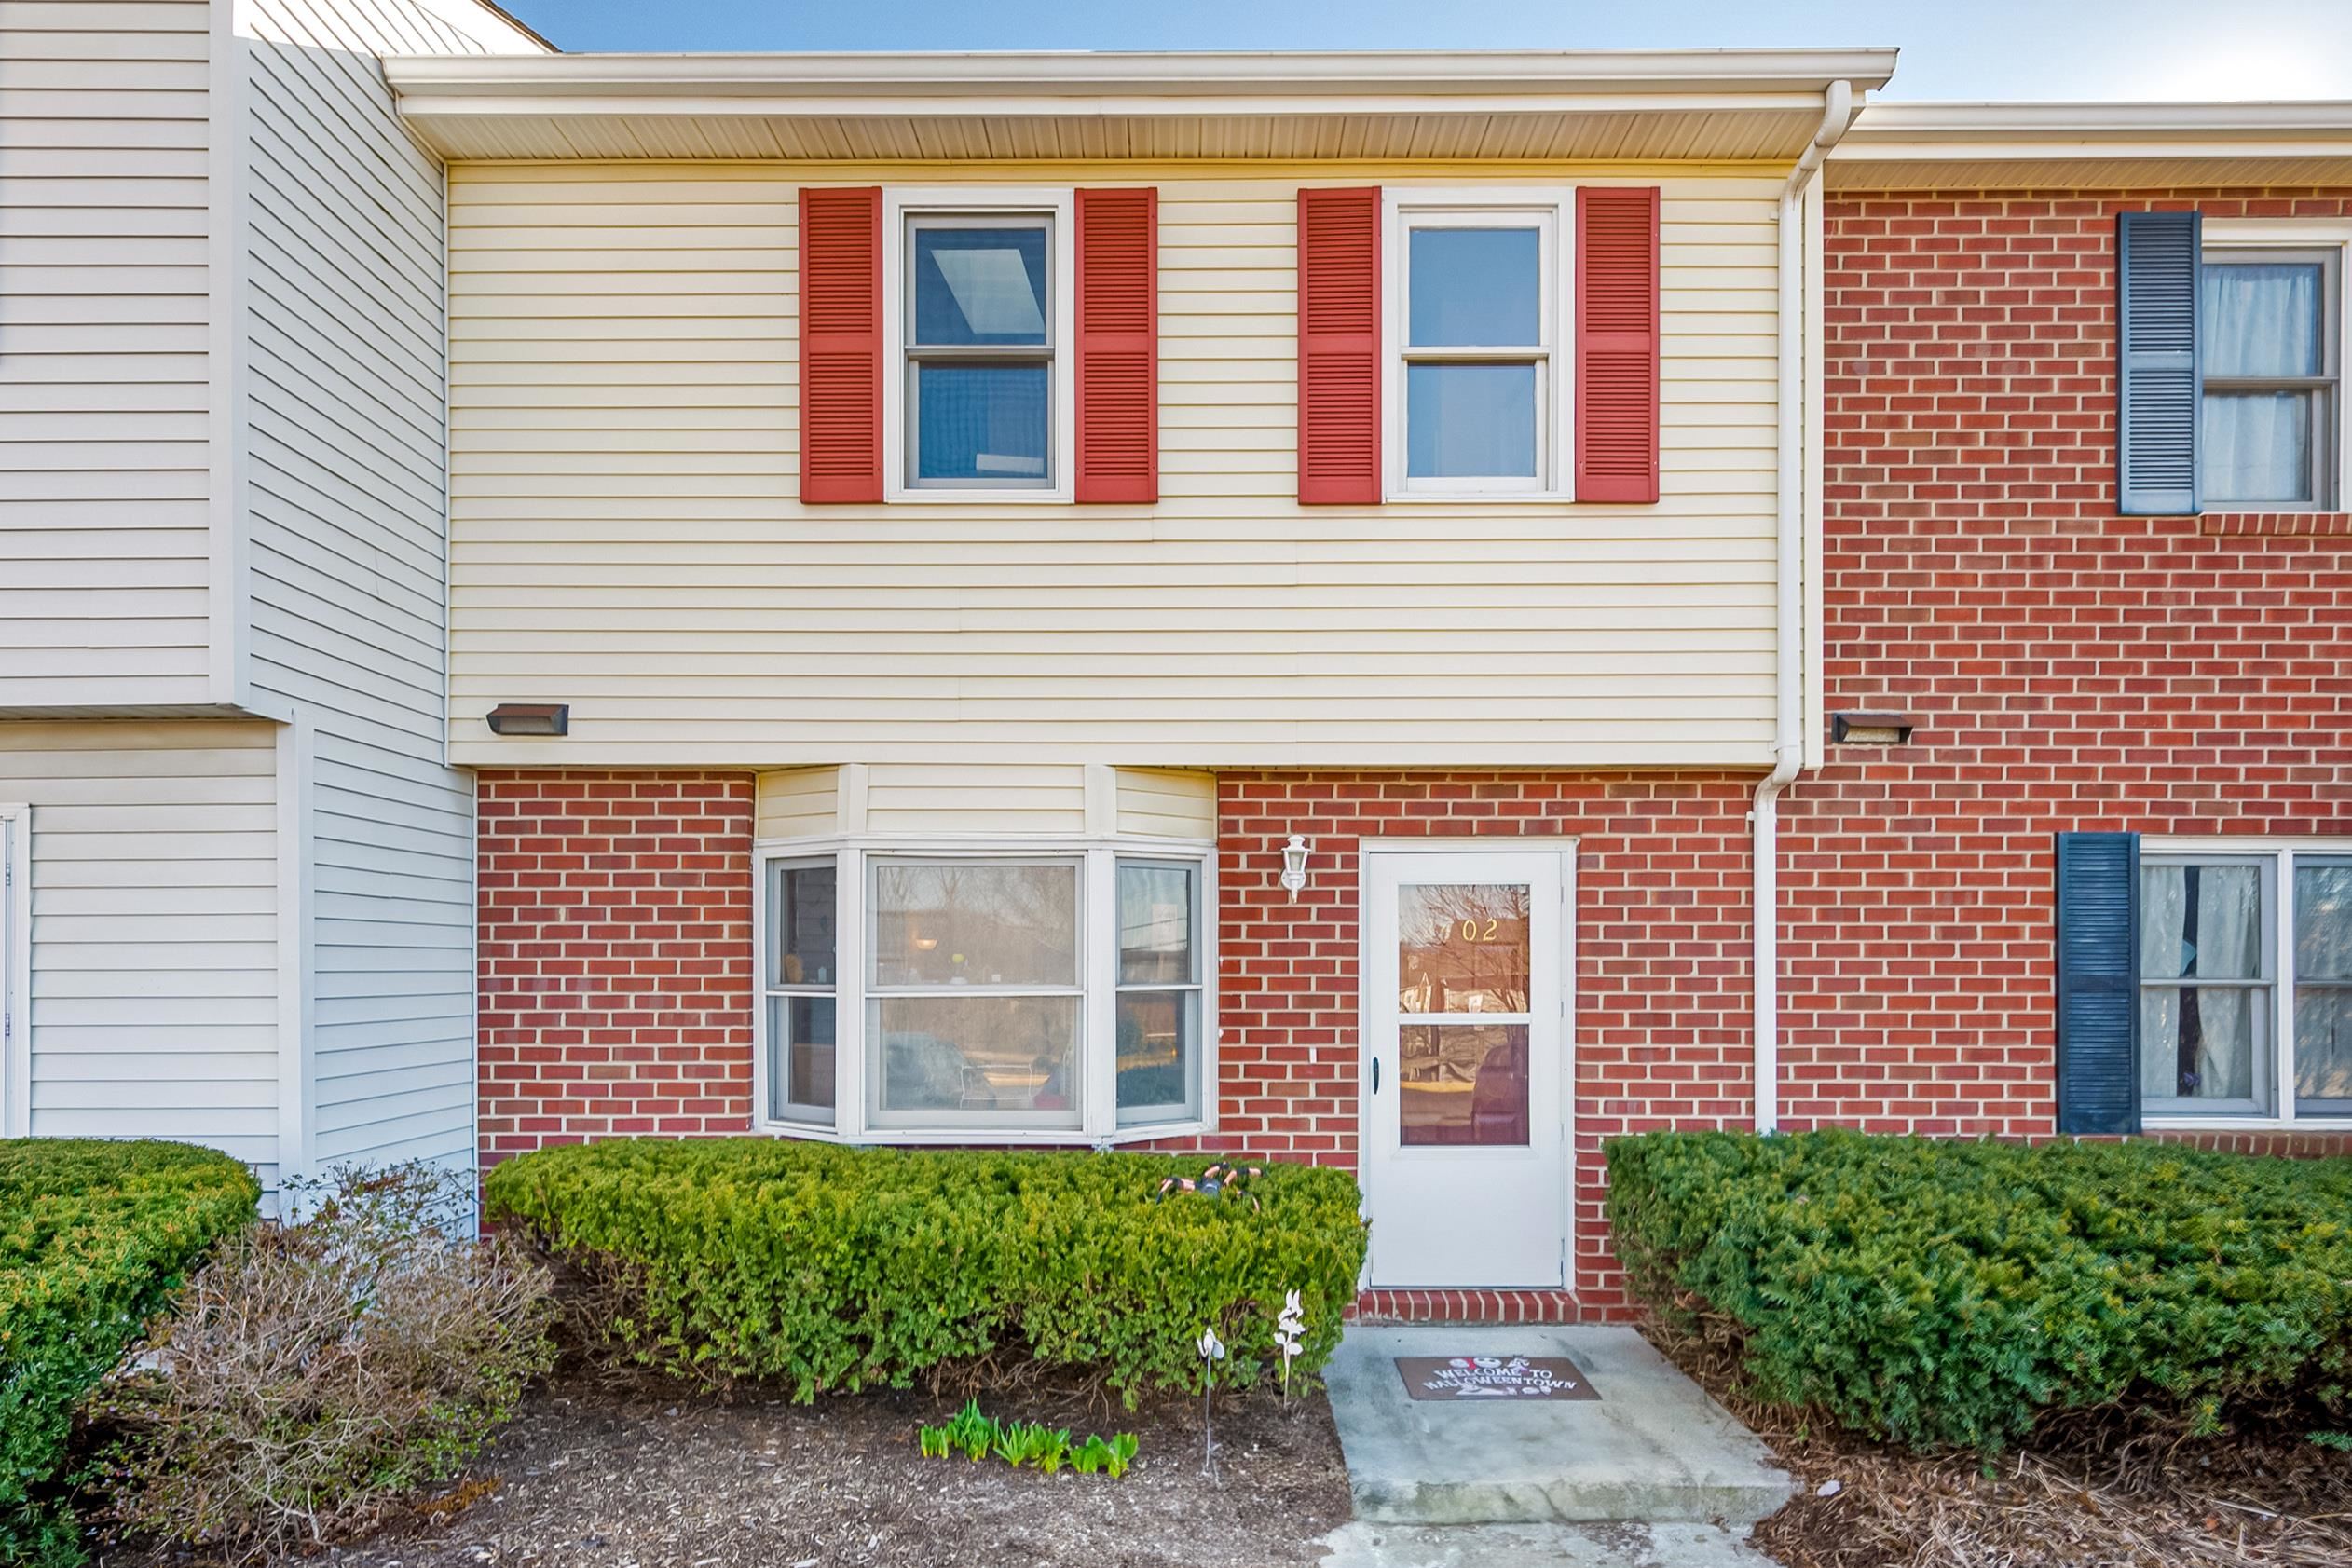 This charming 3-bedroom, 2.5-bathroom townhome offers a prime location adjacent to VCOM, the CRC, and Virginia Tech's campus, making it a haven for convenience and community. On the main level you'll find the kitchen, including a bay window providing plenty of natural light, a seperate diing area, large family room, half bathroom and laundry. Upstairs consists of the primary bedroom enhanced by skylights and ensuite, two additional bedrooms and a shared full bath off the hallway. Outside, a spacious fenced patio area awaits, offering endless opportunities for outdoor entertainment and relaxation.